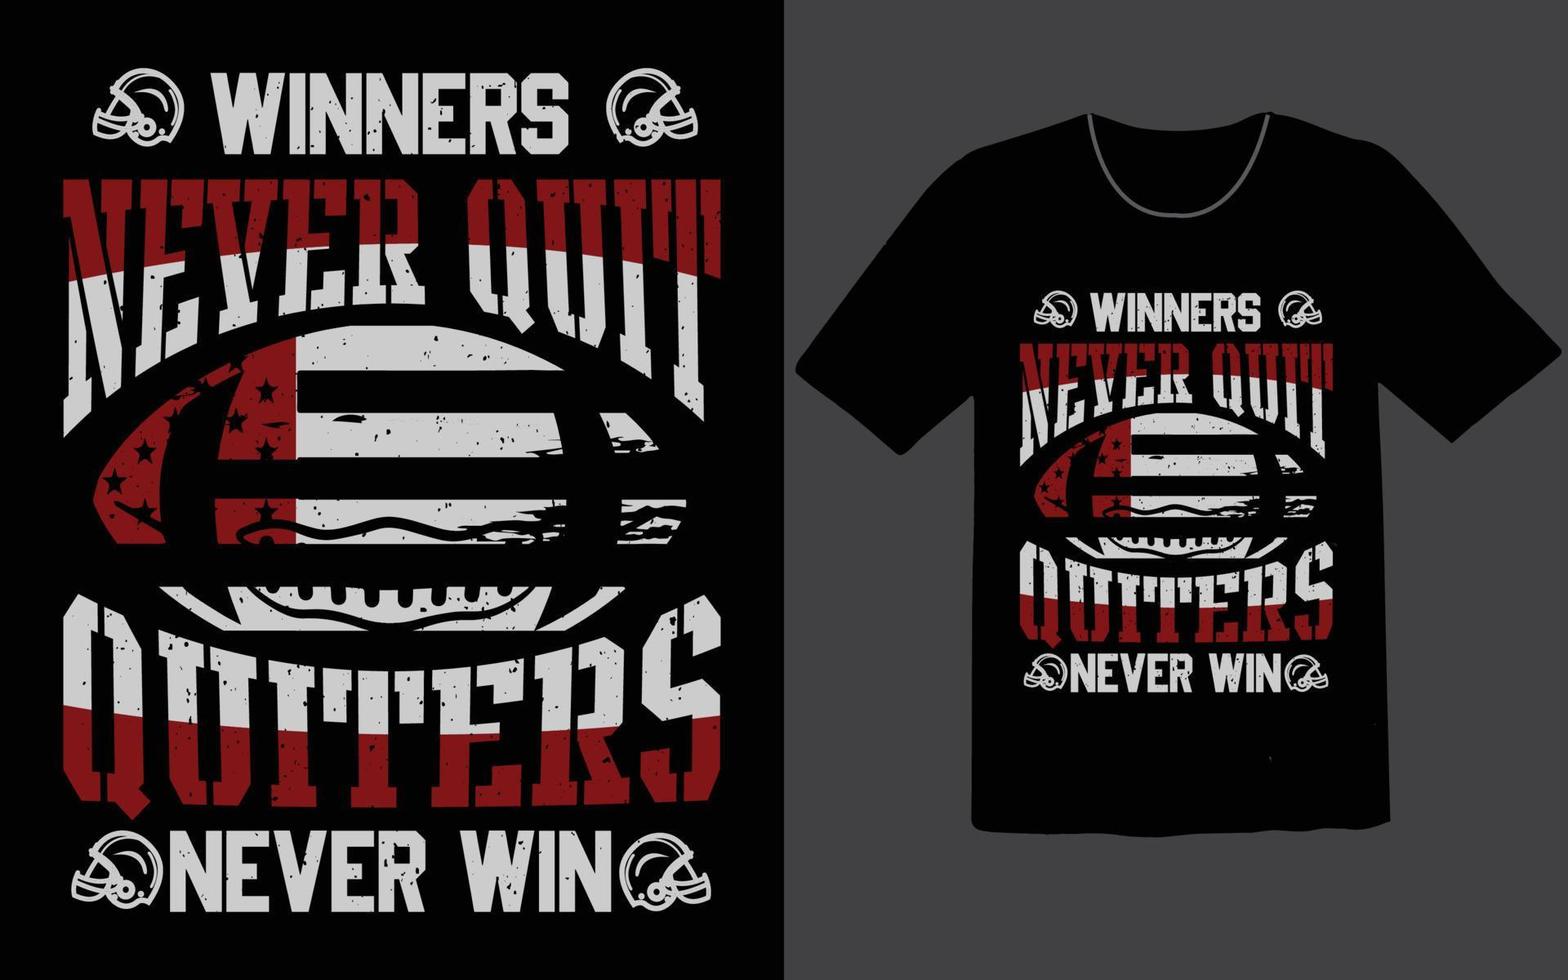 Winners never quit quiters never win t shirt vector